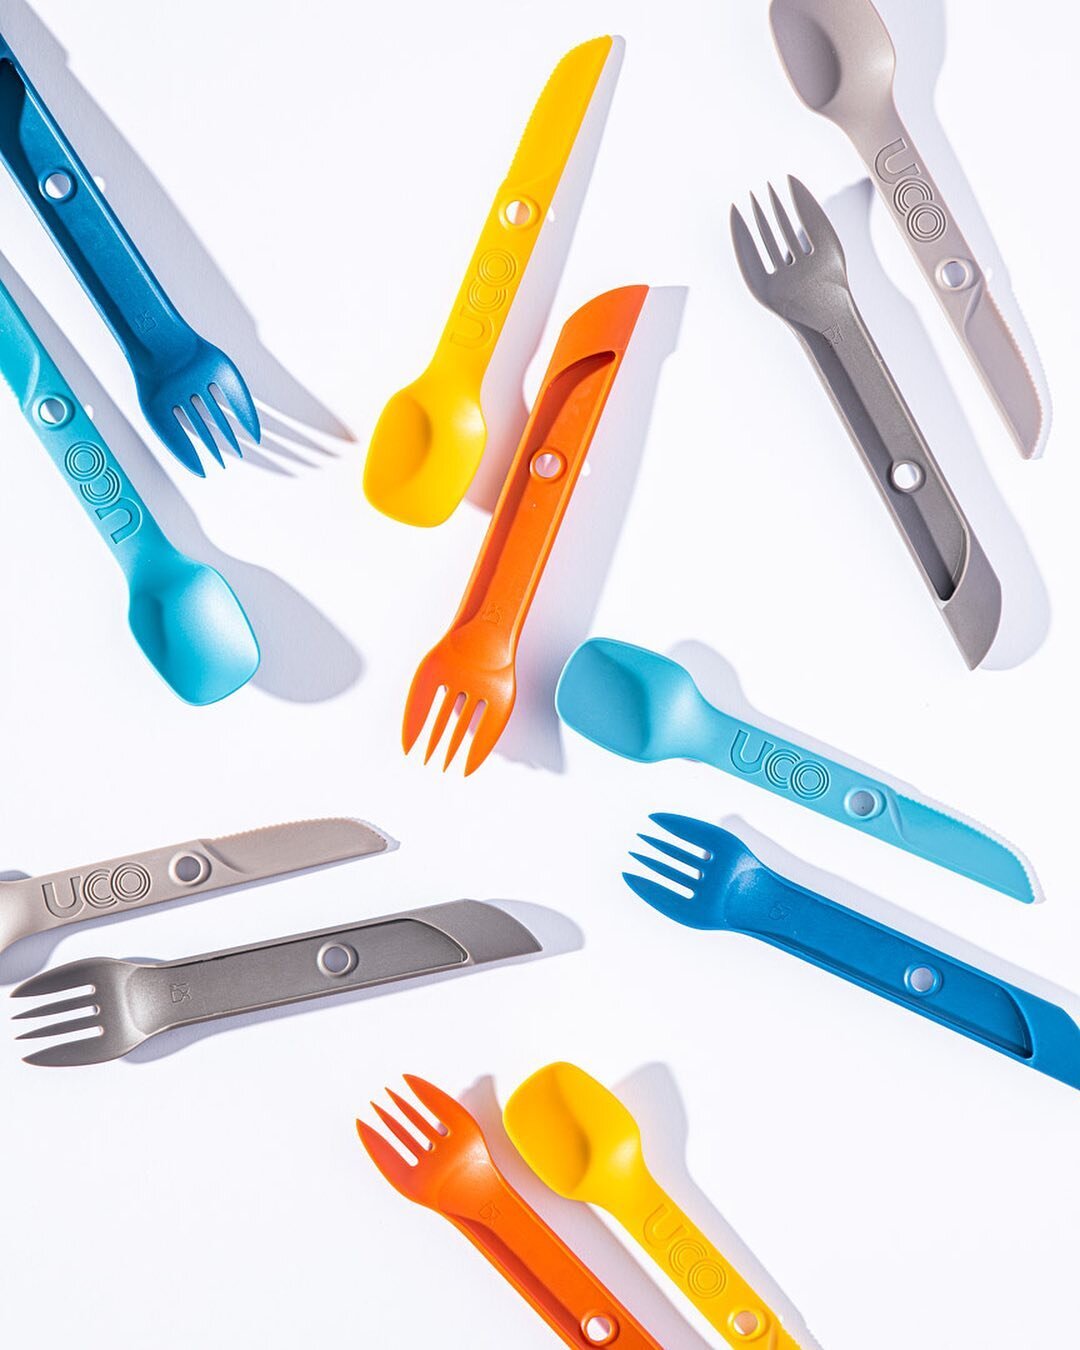 I loved these when I first got the grey set&hellip; Imagine my delight when I discovered these people know a thing or two about COLOR! My favorite on-the-go utensil (and stand-in product for light testing) @ucogear , shot with @godoxlighting .

The b